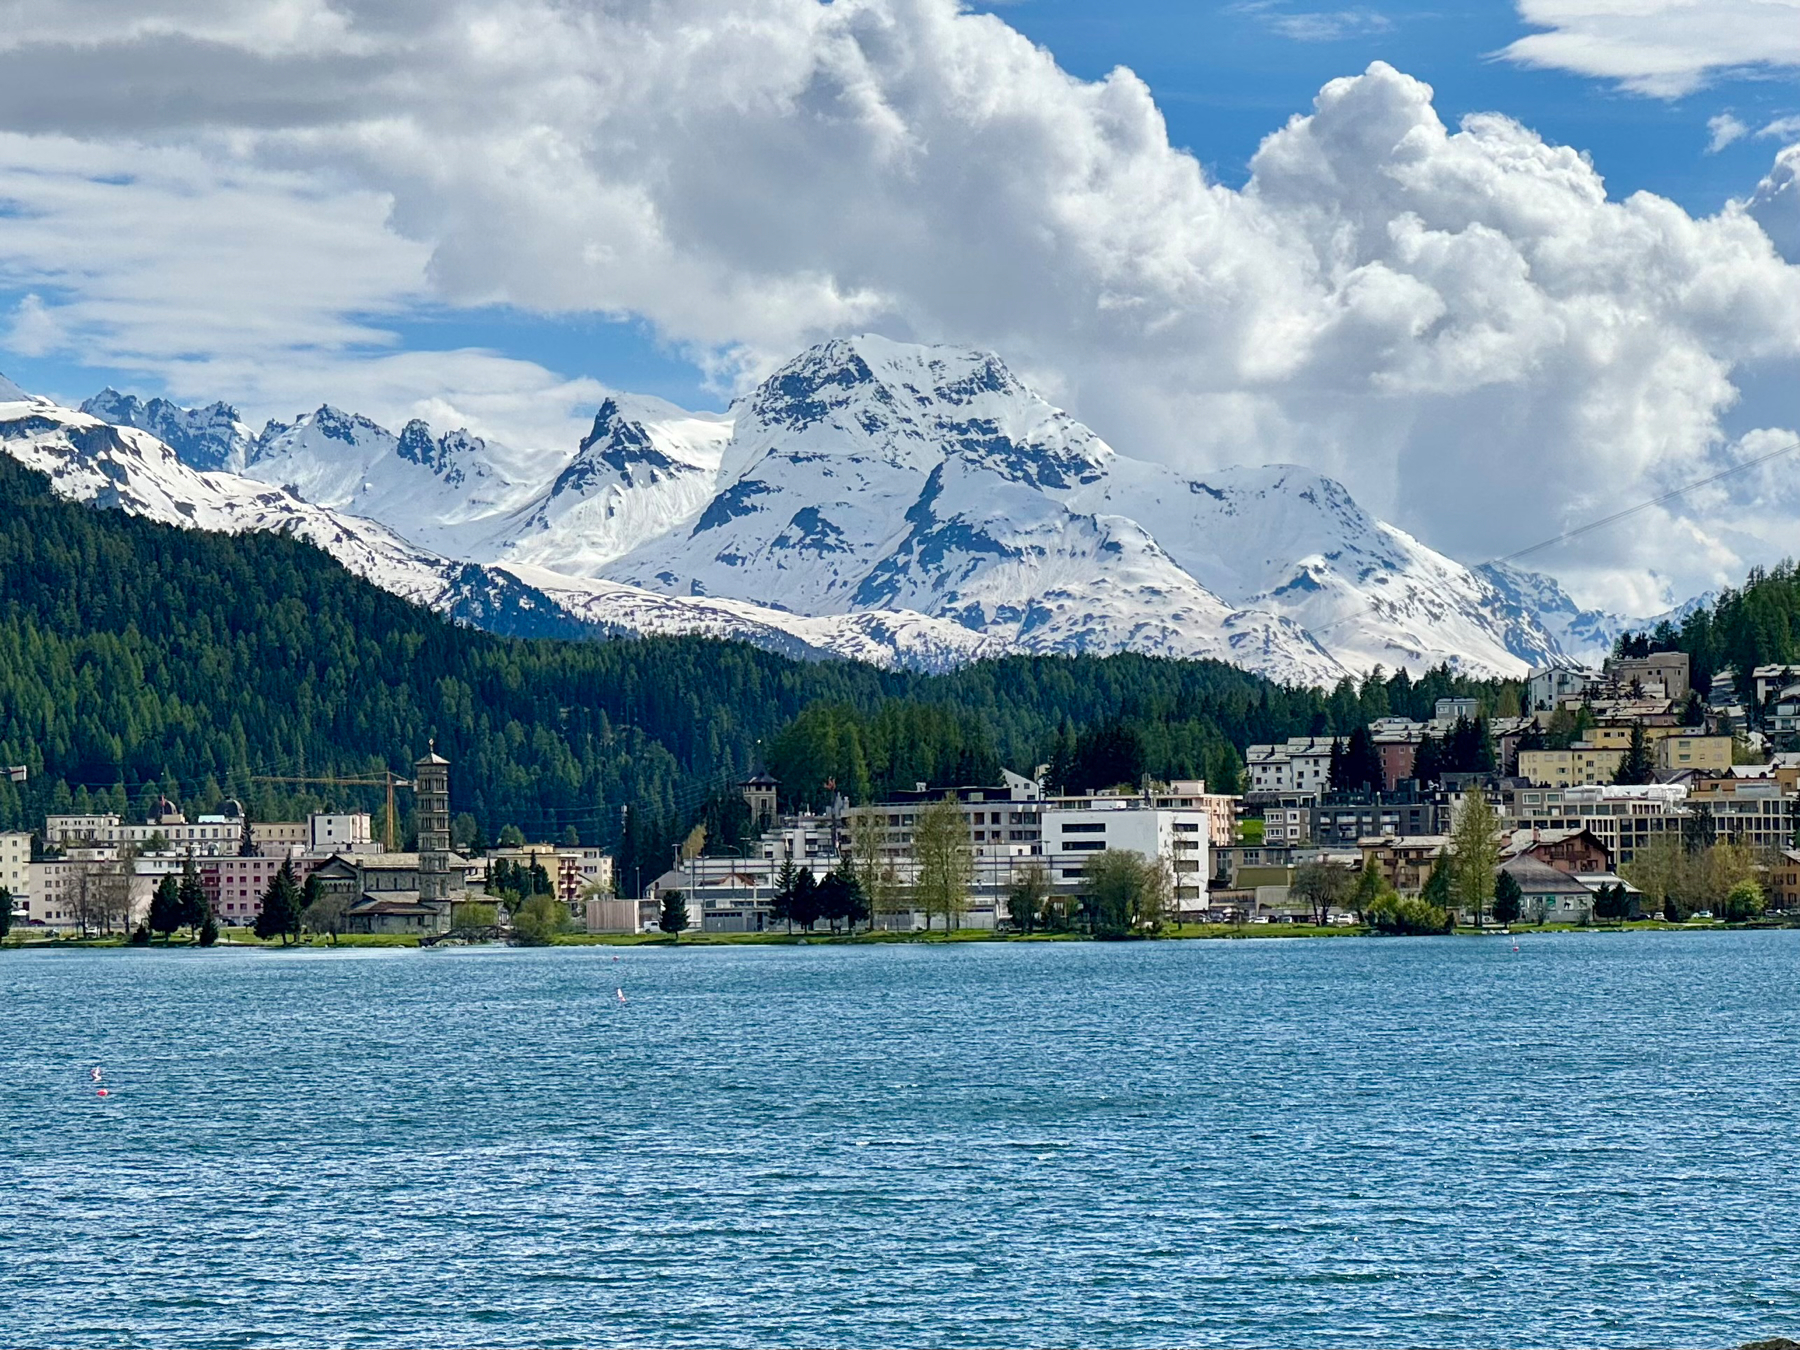 A scenic view of a lake with a town in the foreground and snow-capped mountains in the background under a blue sky with clouds.